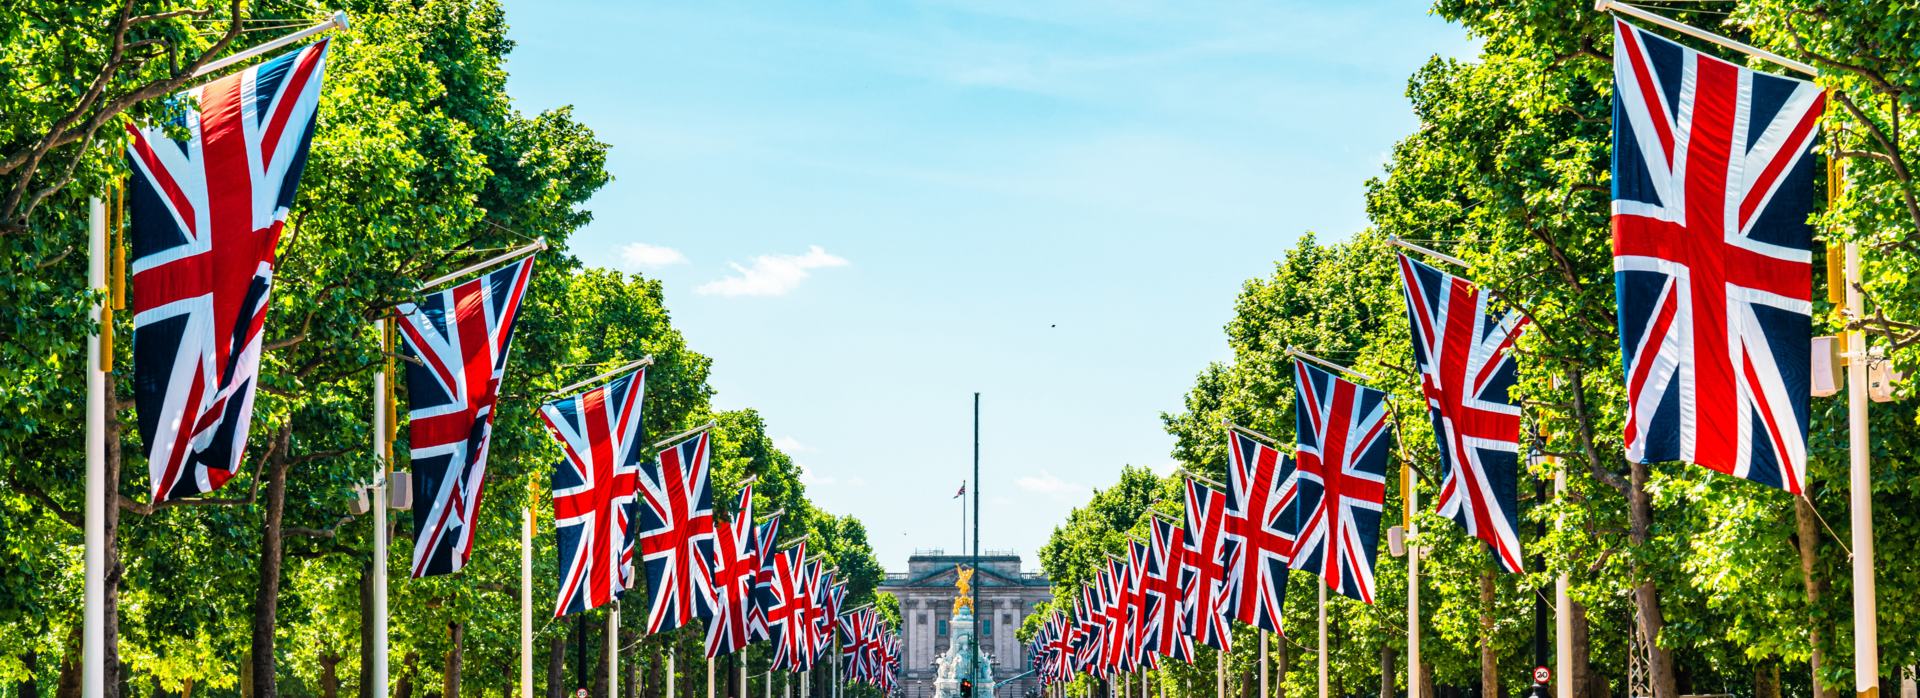 English flags lining the driveway to the Royal Palace